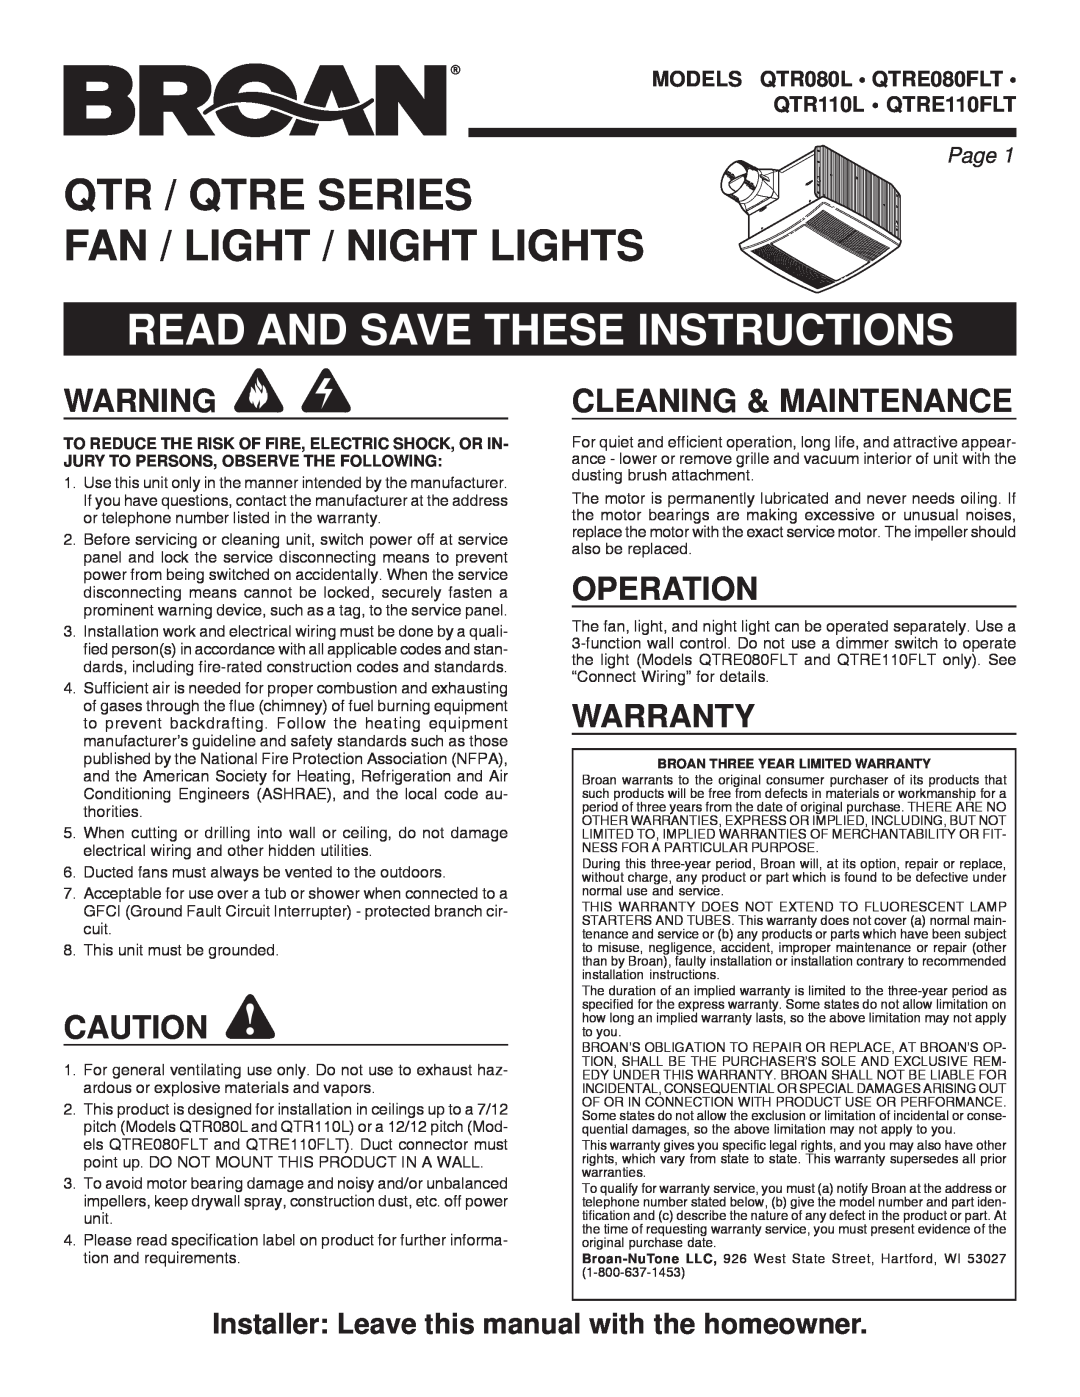 Broan QTRE080FLT, QTRE110FLT manual Read And Save These Instructions, Cleaning & Maintenance, Operation, Warranty, Page 